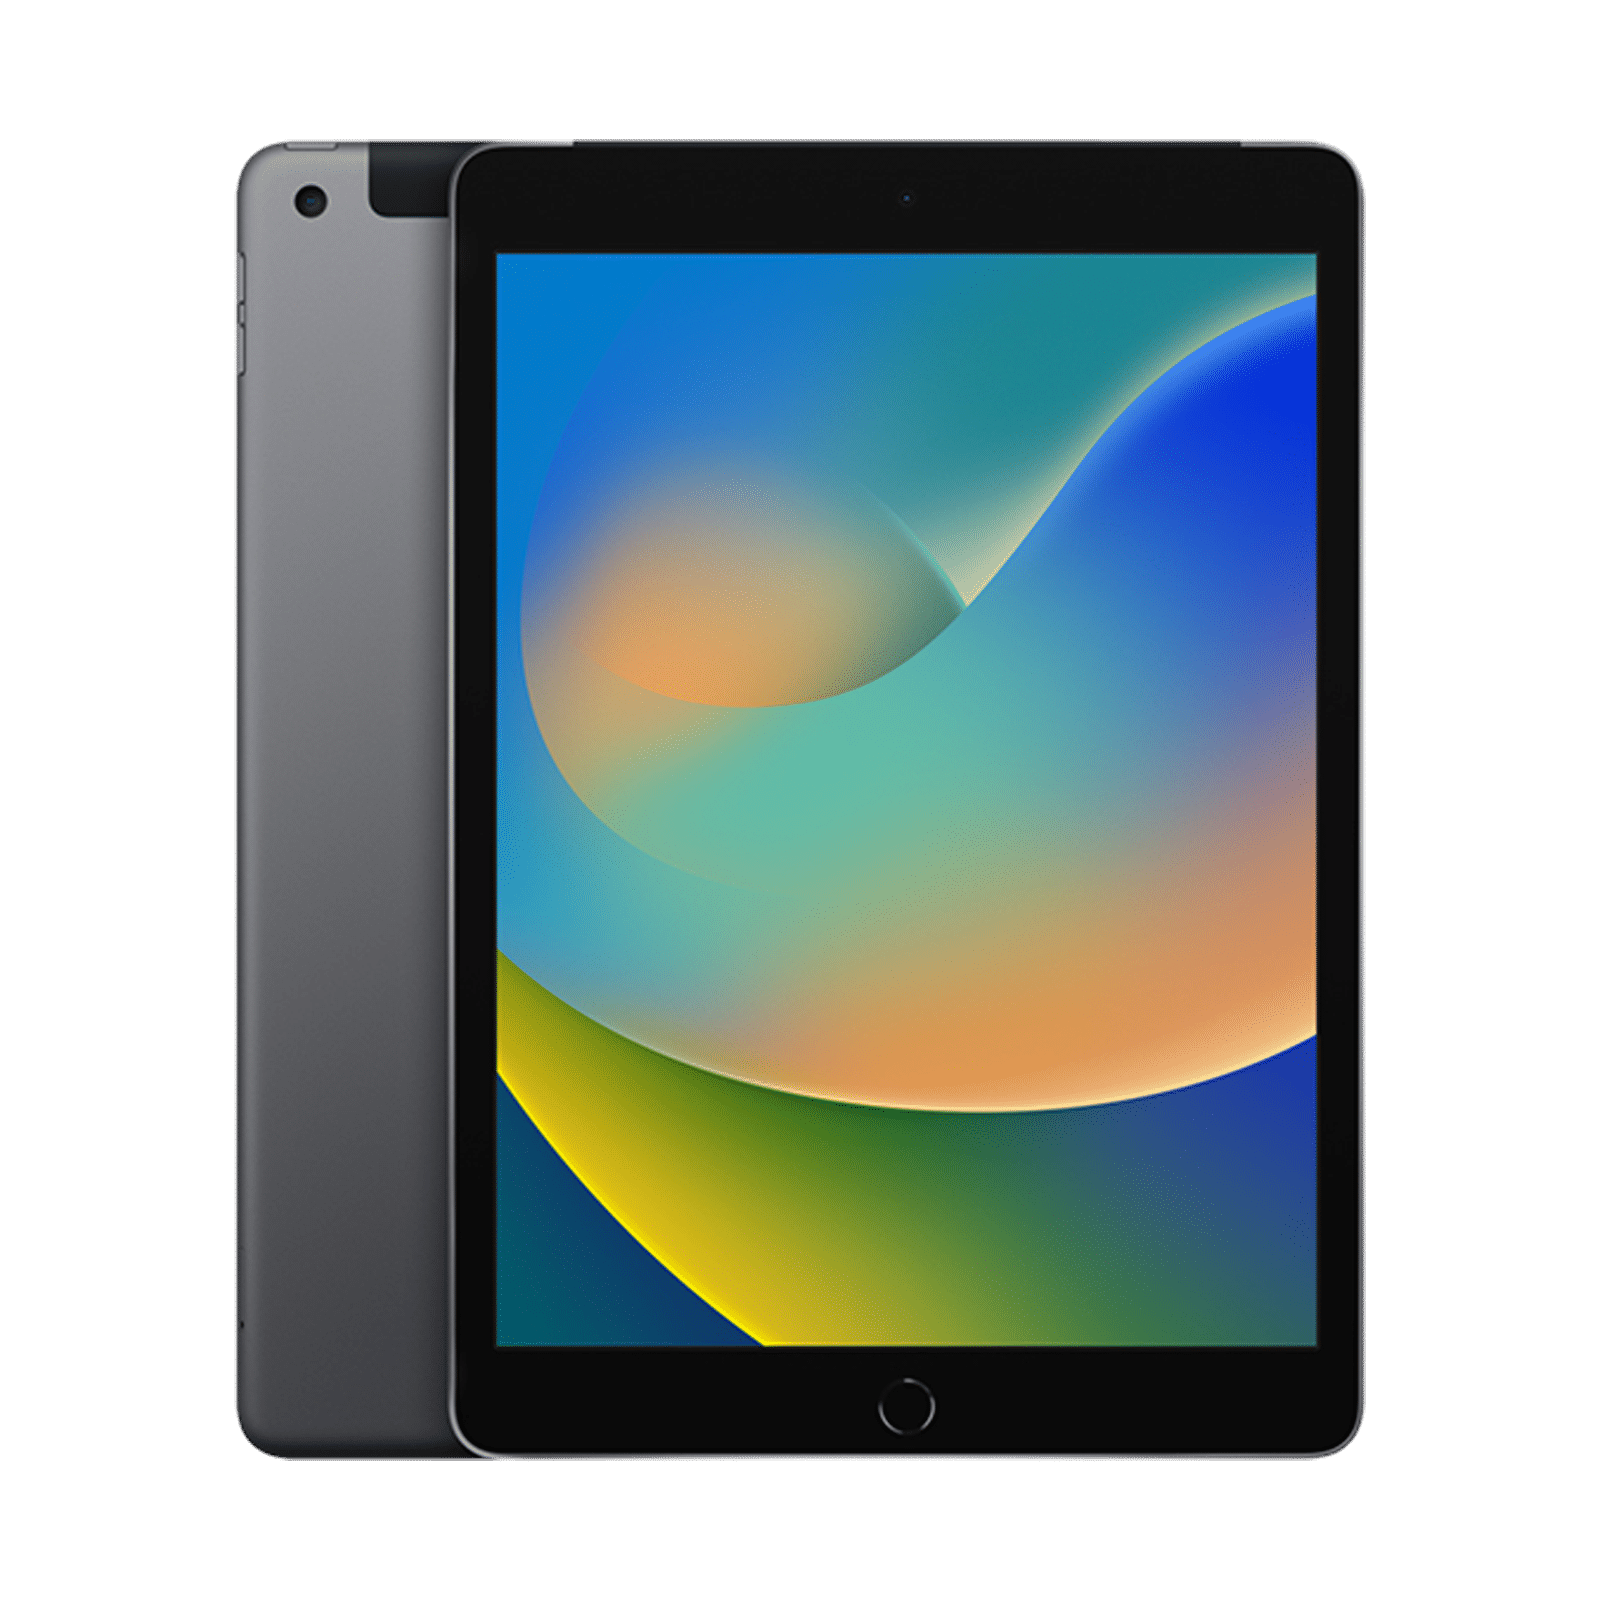 Apple iPad (9th generation, 2021) review